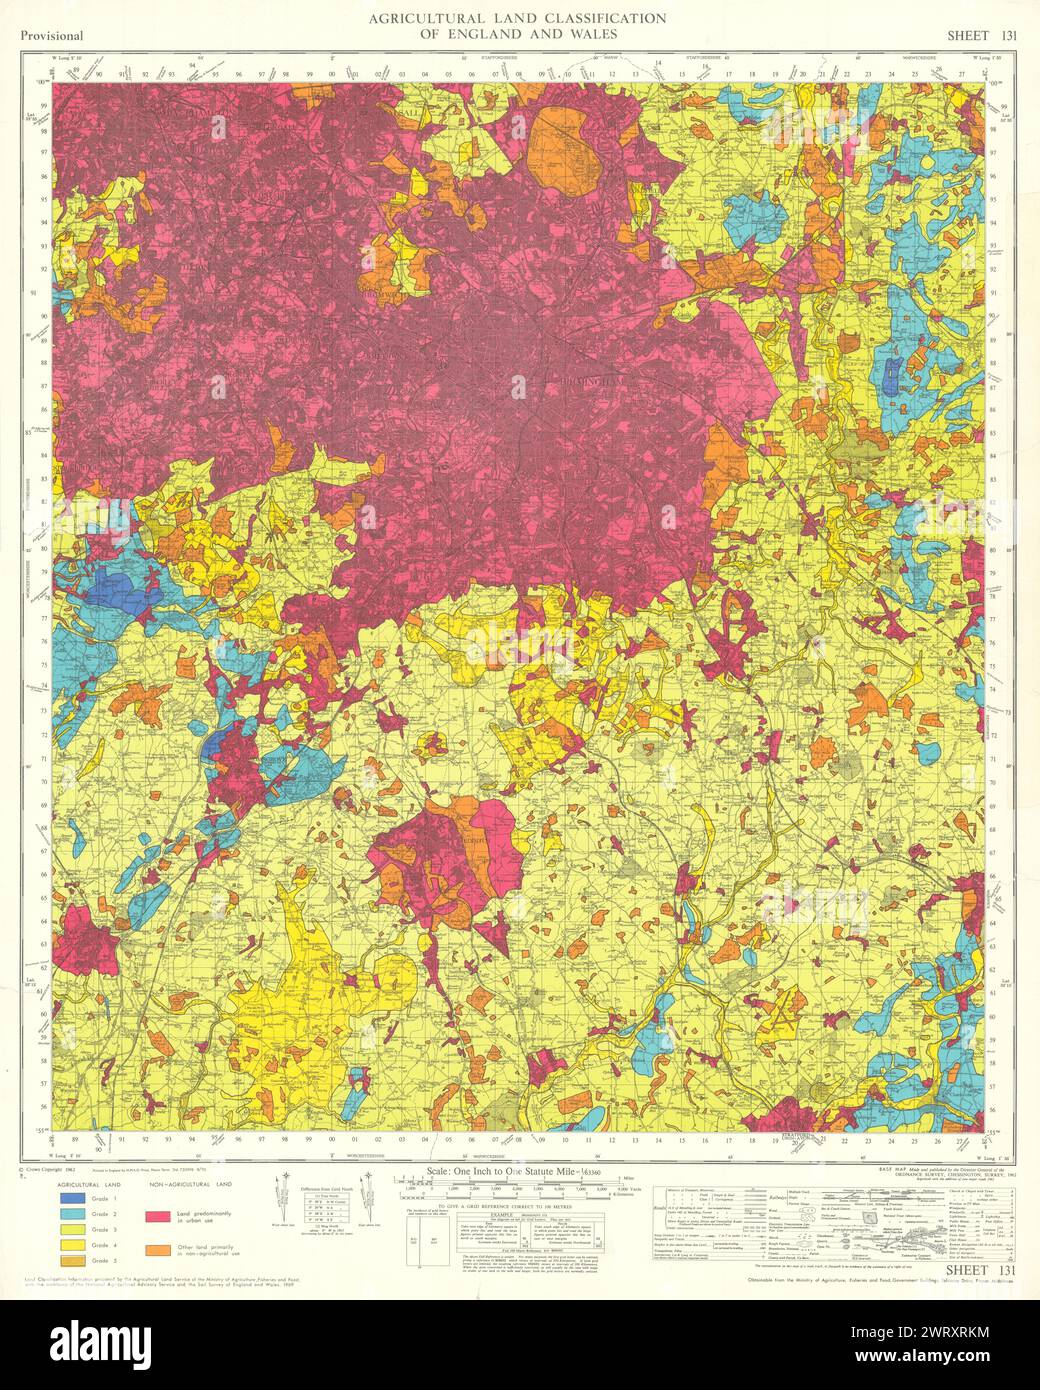 Agricultural Land Classification 131 Birmingham. West Midlands. Arden 1970 map Stock Photo